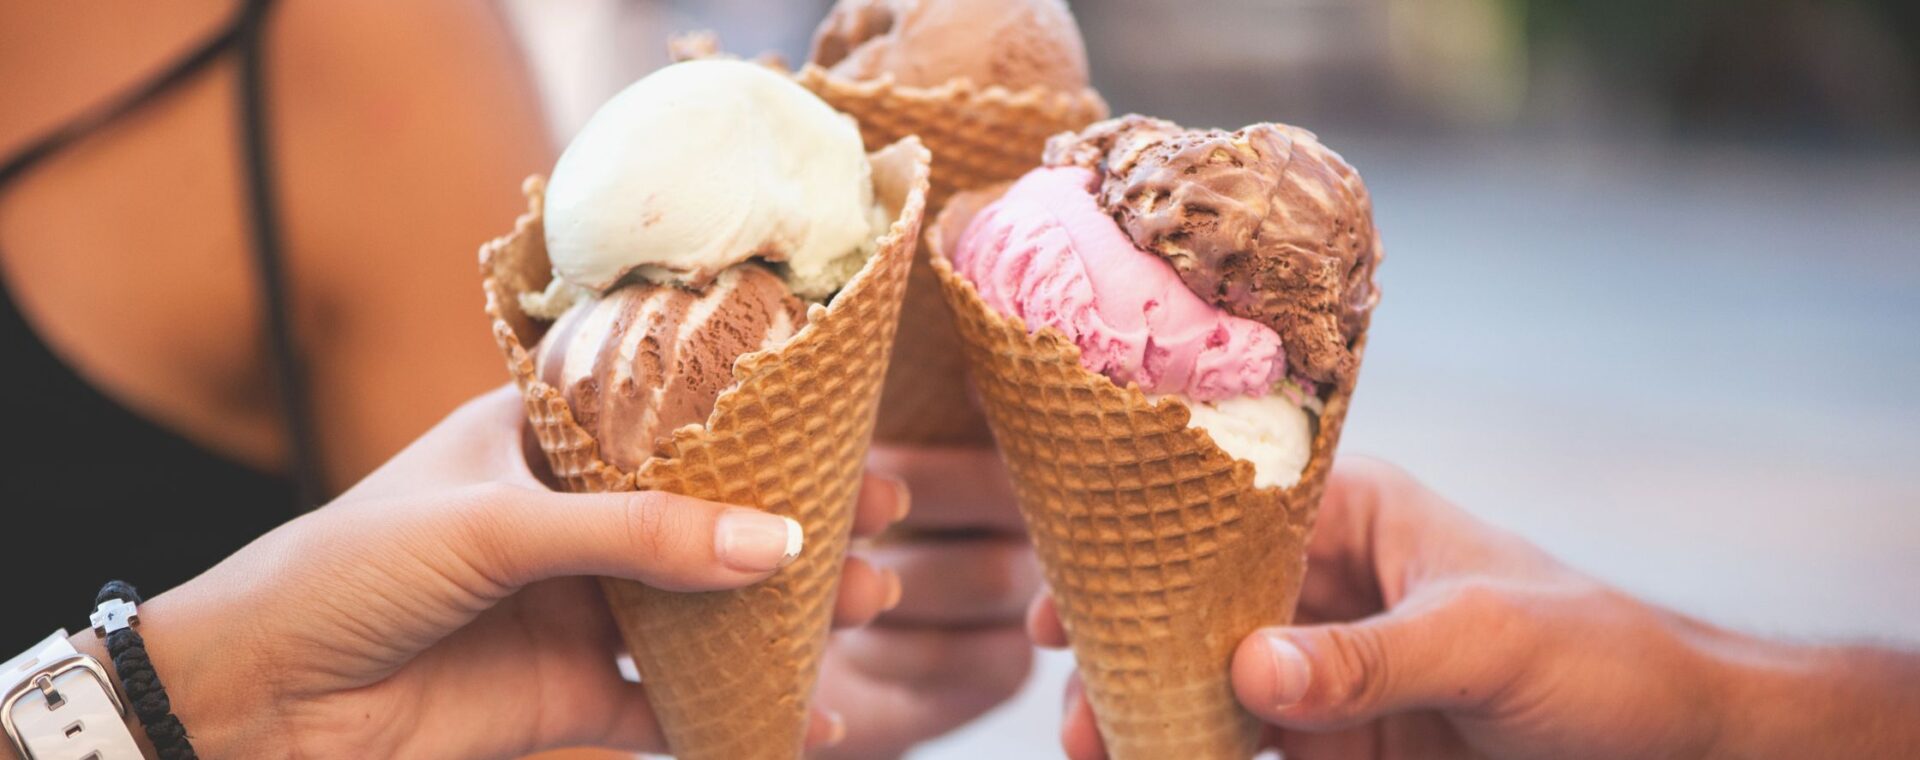 Three people with ice cream in their hands